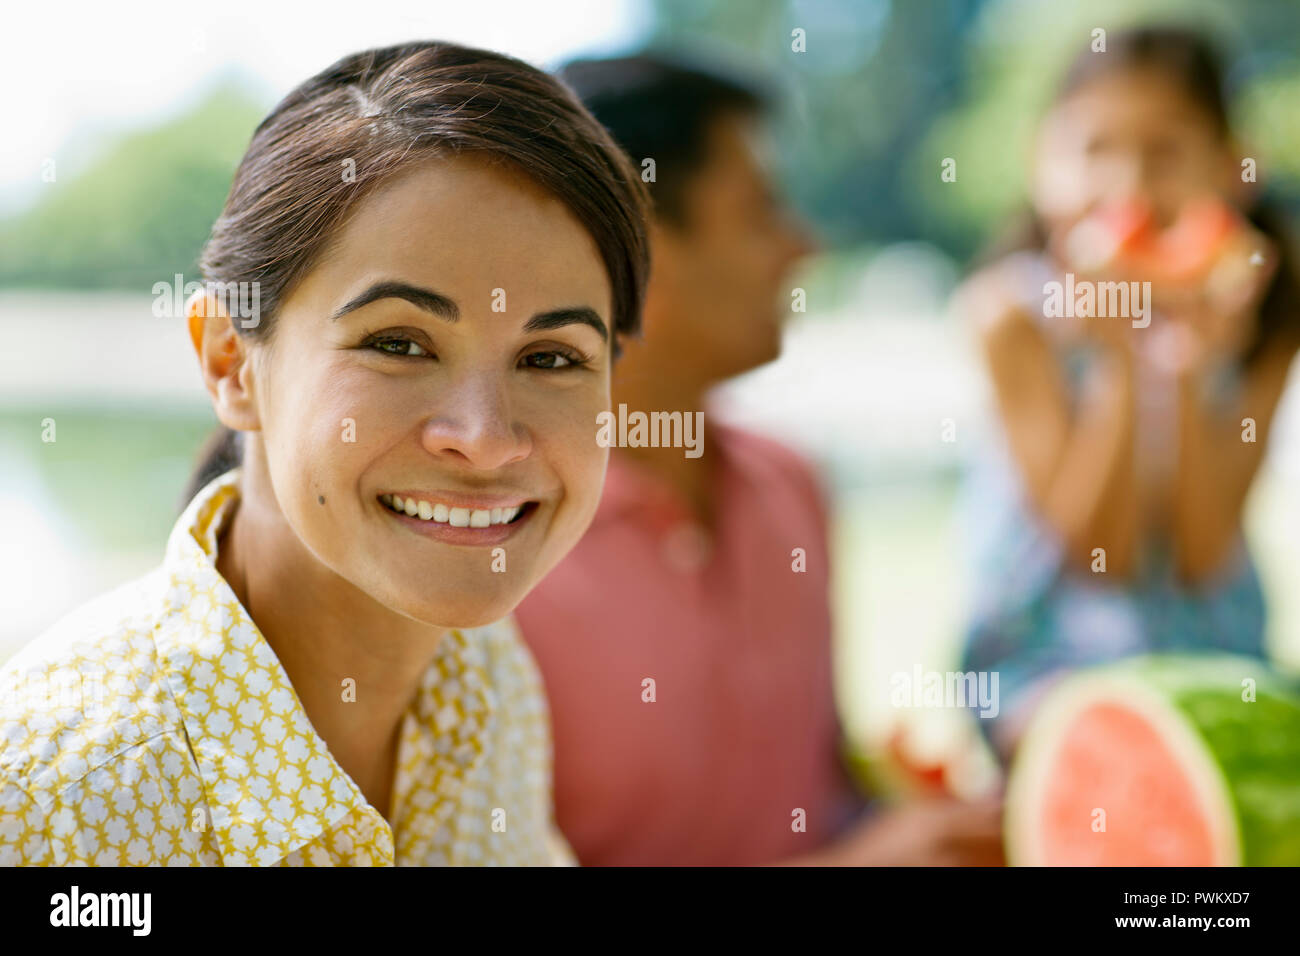 Portrait of a smiling young woman. Stock Photo